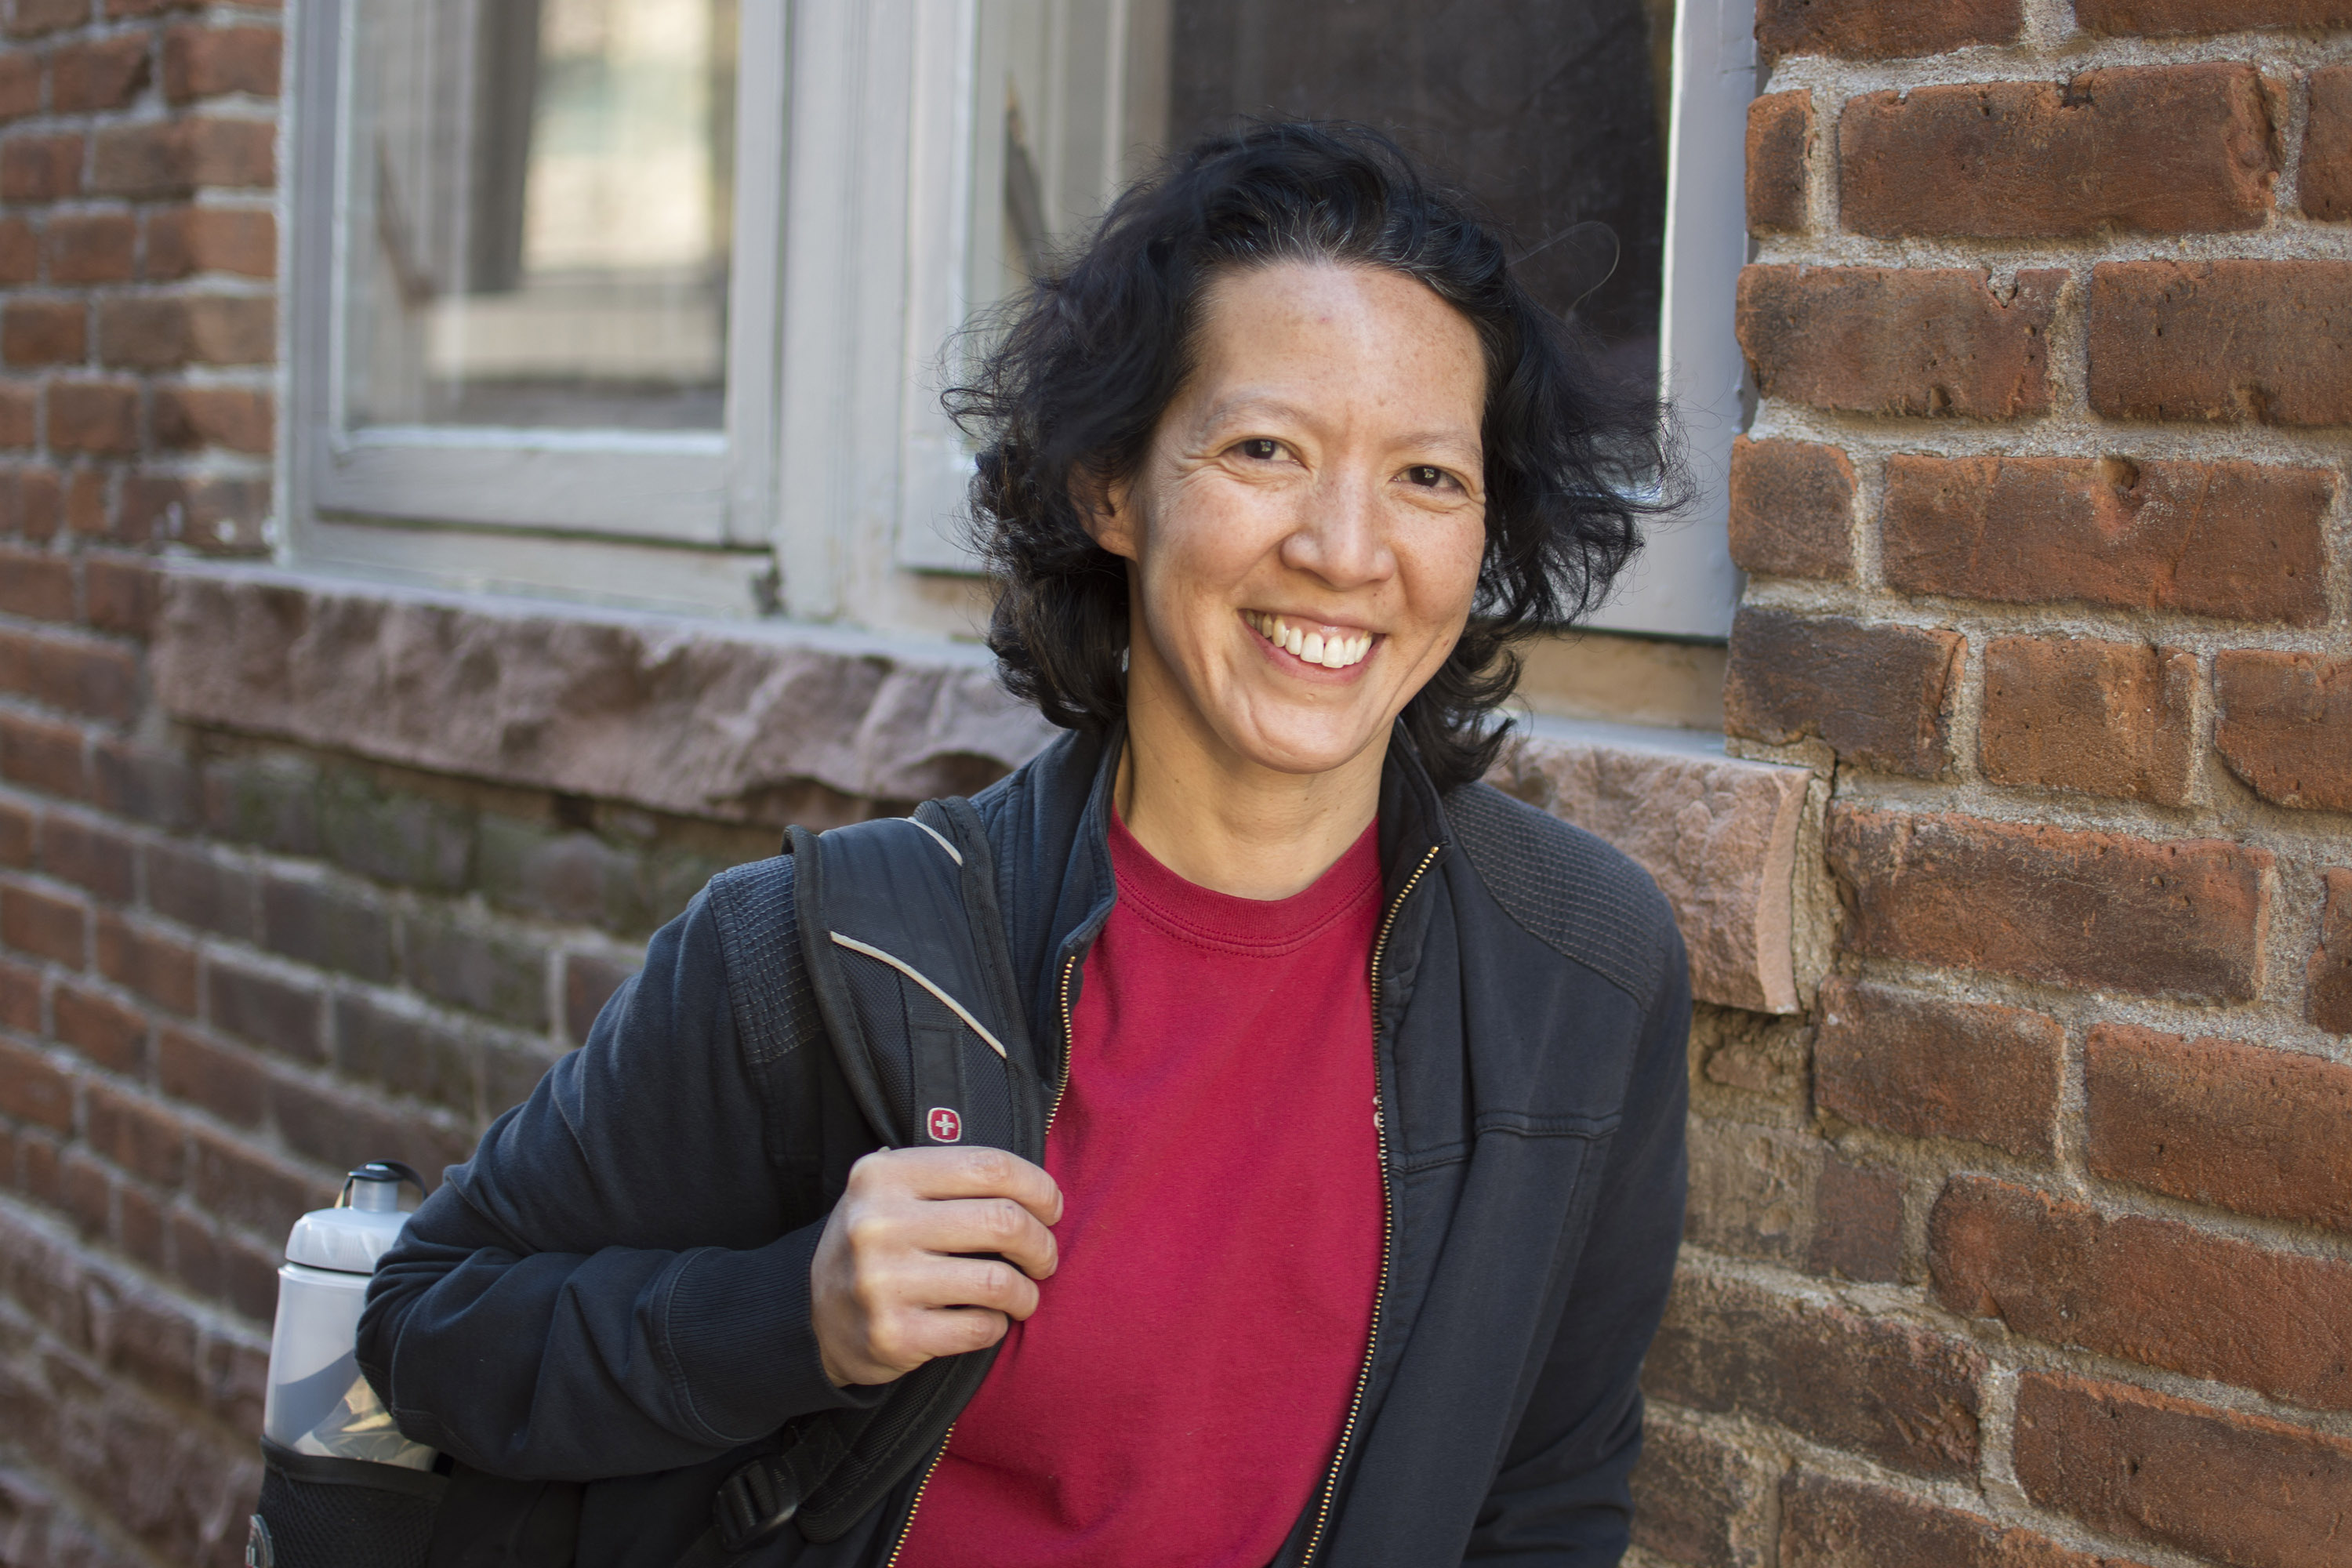 woman in a red shirt with a backpack over her shoulder smiling next to a brick wall